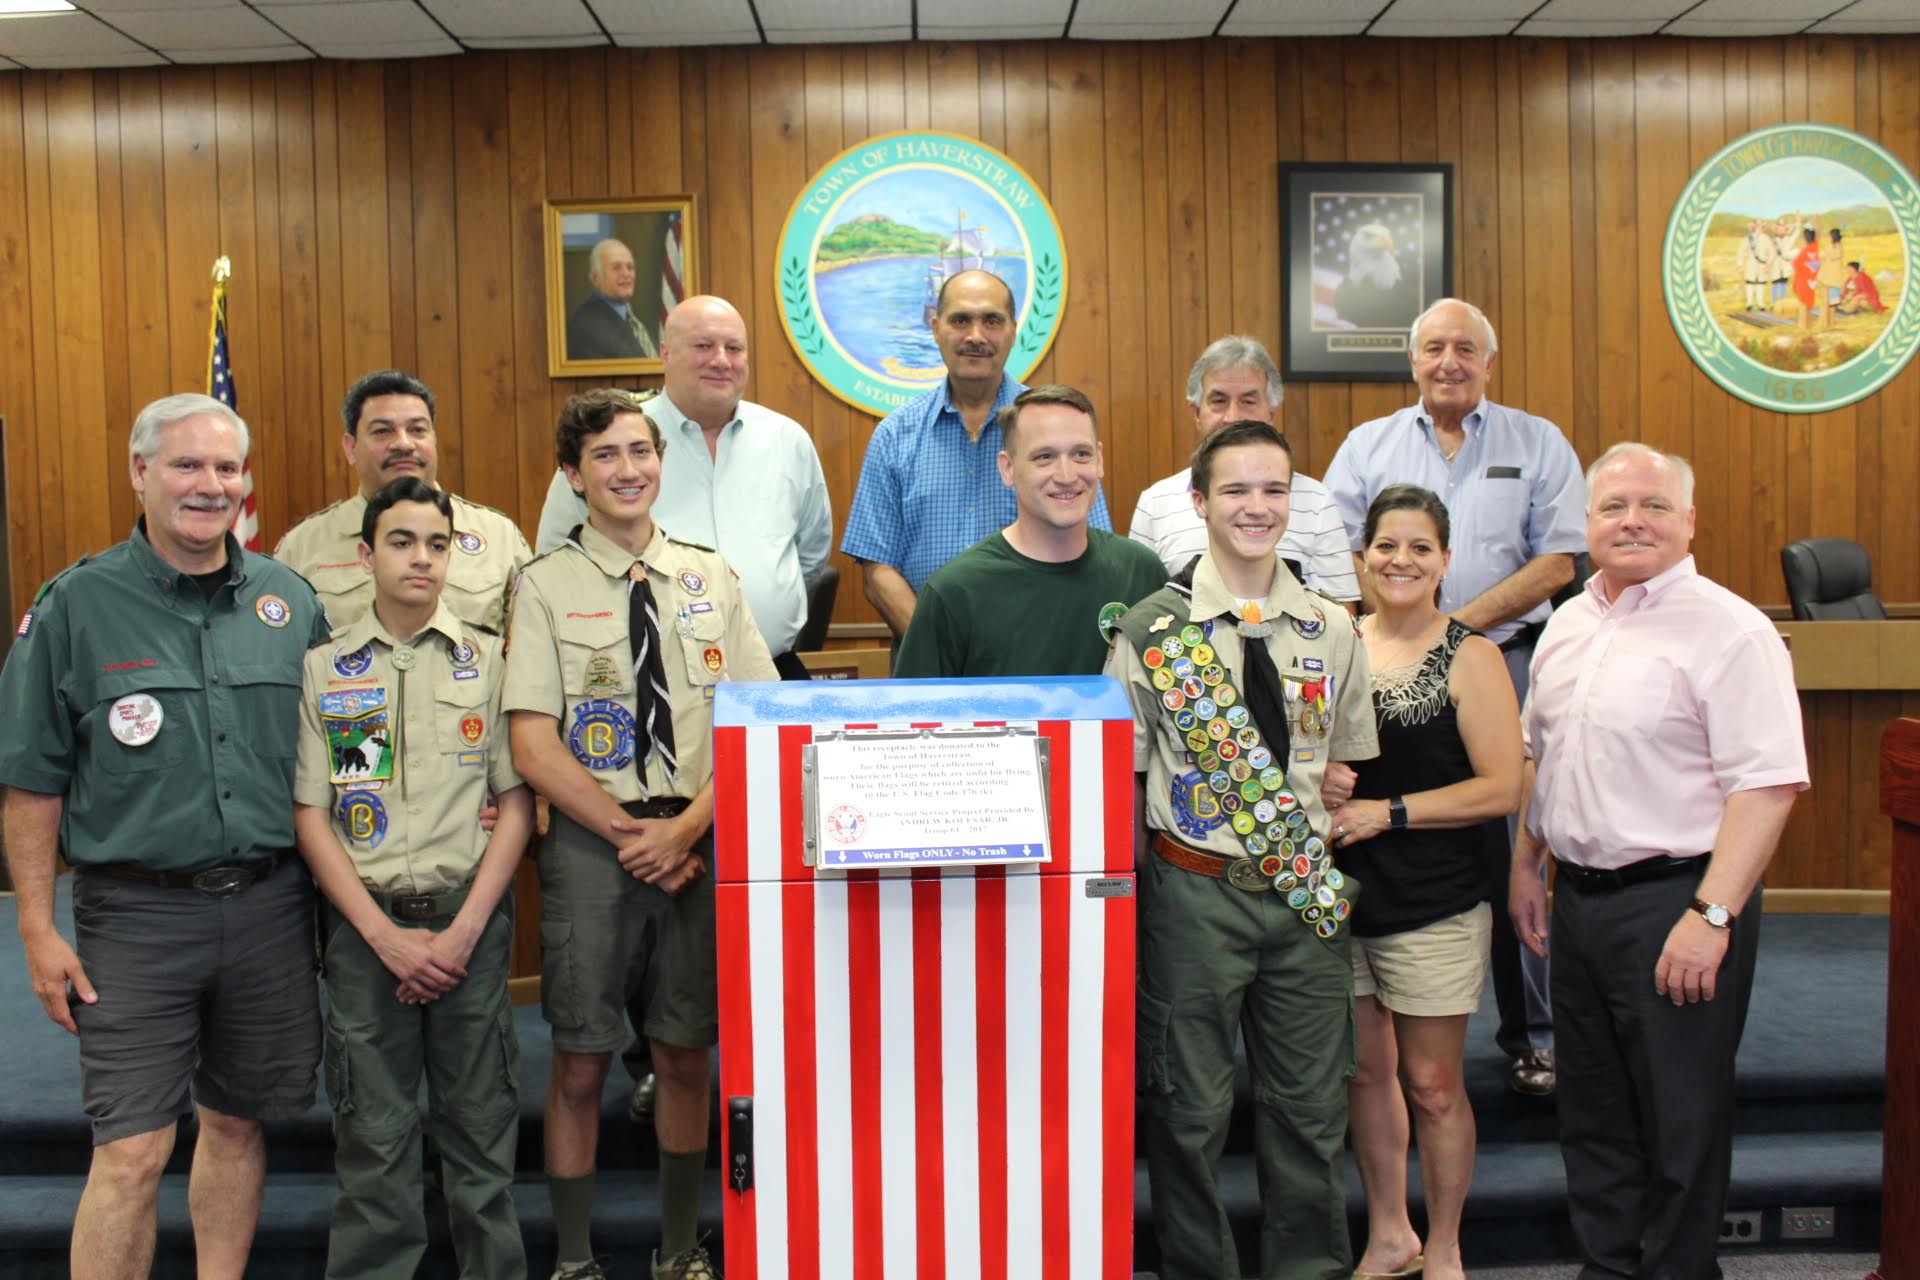 KOLESAR’S EAGLE SCOUT PROJECT ANNOUNCED AT HAVERSTRAW BOARD MEETING